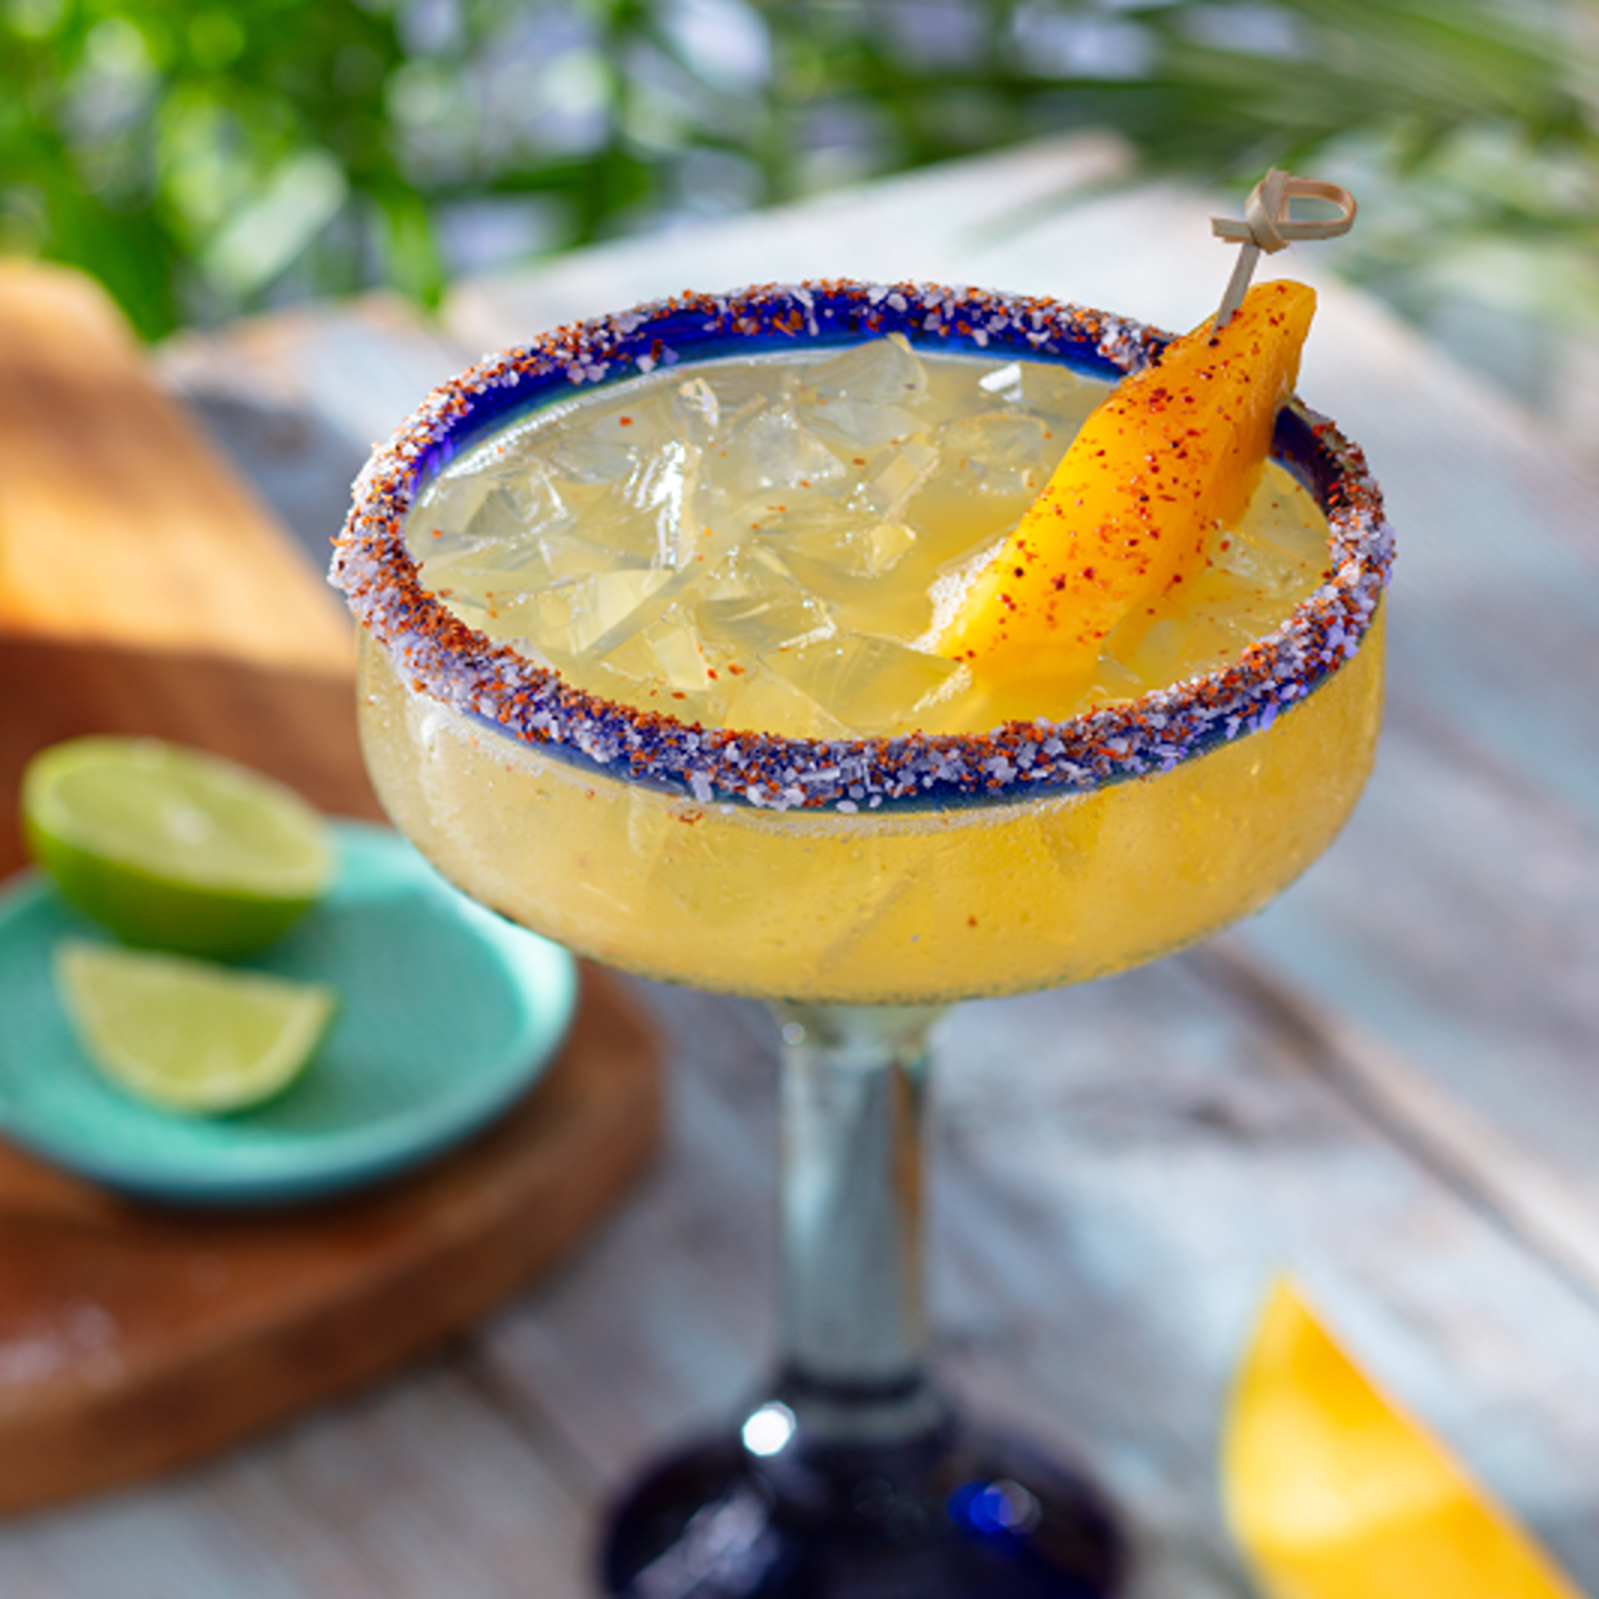 Hot Honey Mango Margarita - Casamigos Reposado Tequila, mango, hot honey and bitters with a sweet and spicy rim.